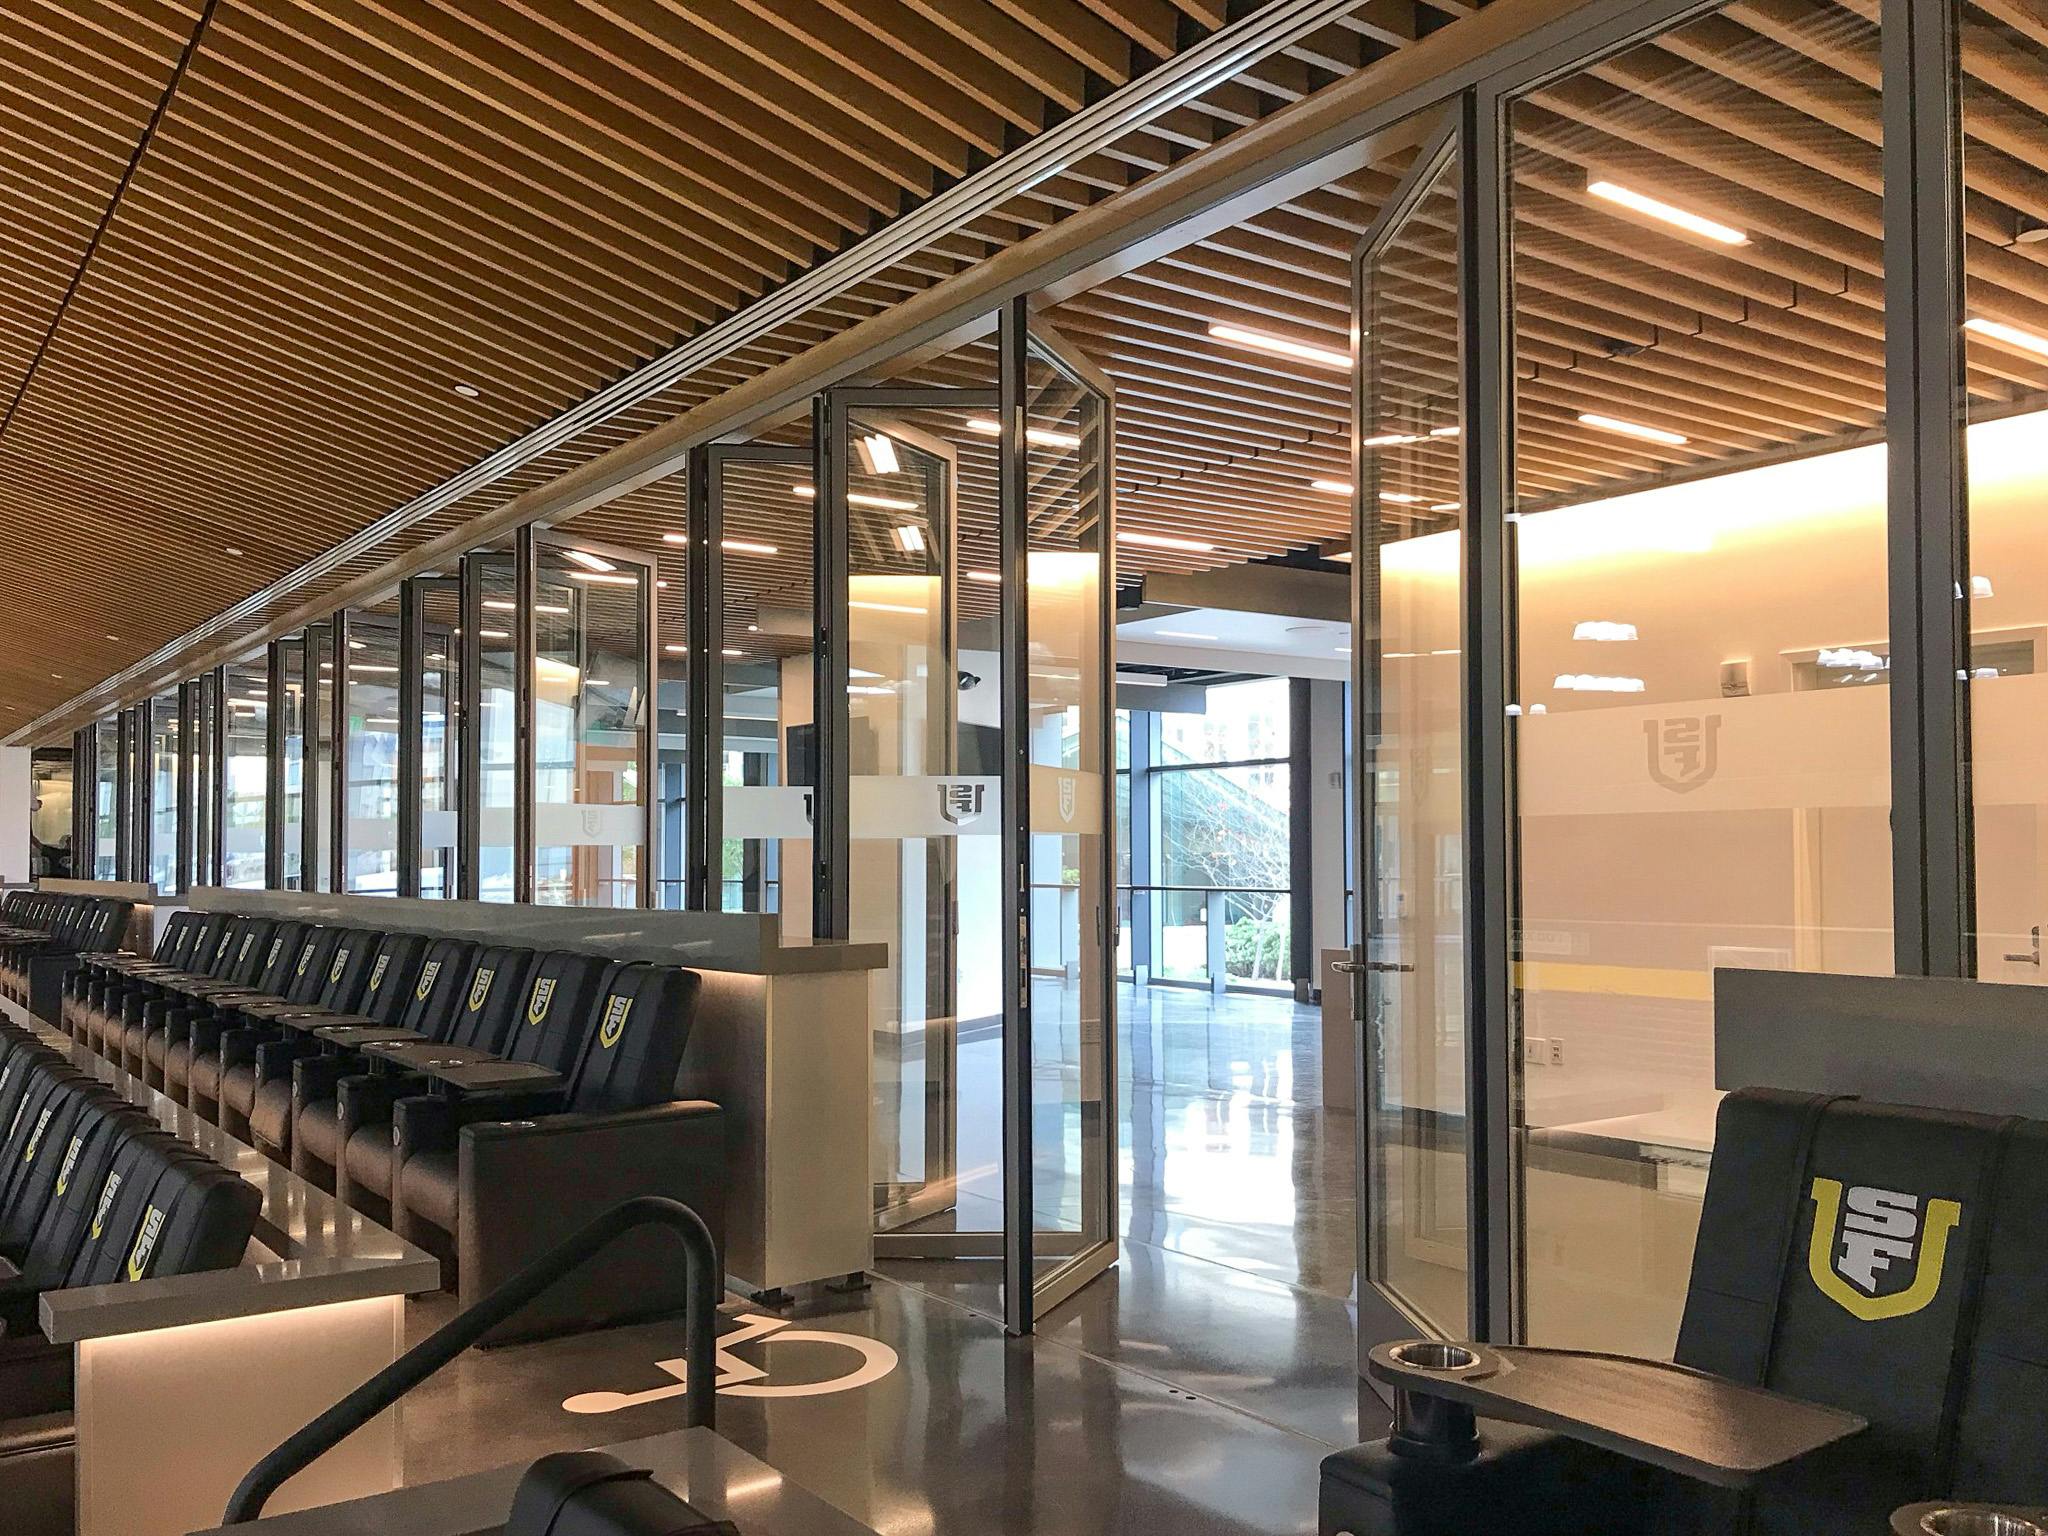 The New Sobrato Club Level at USF with NanaWall interior operable glass wall